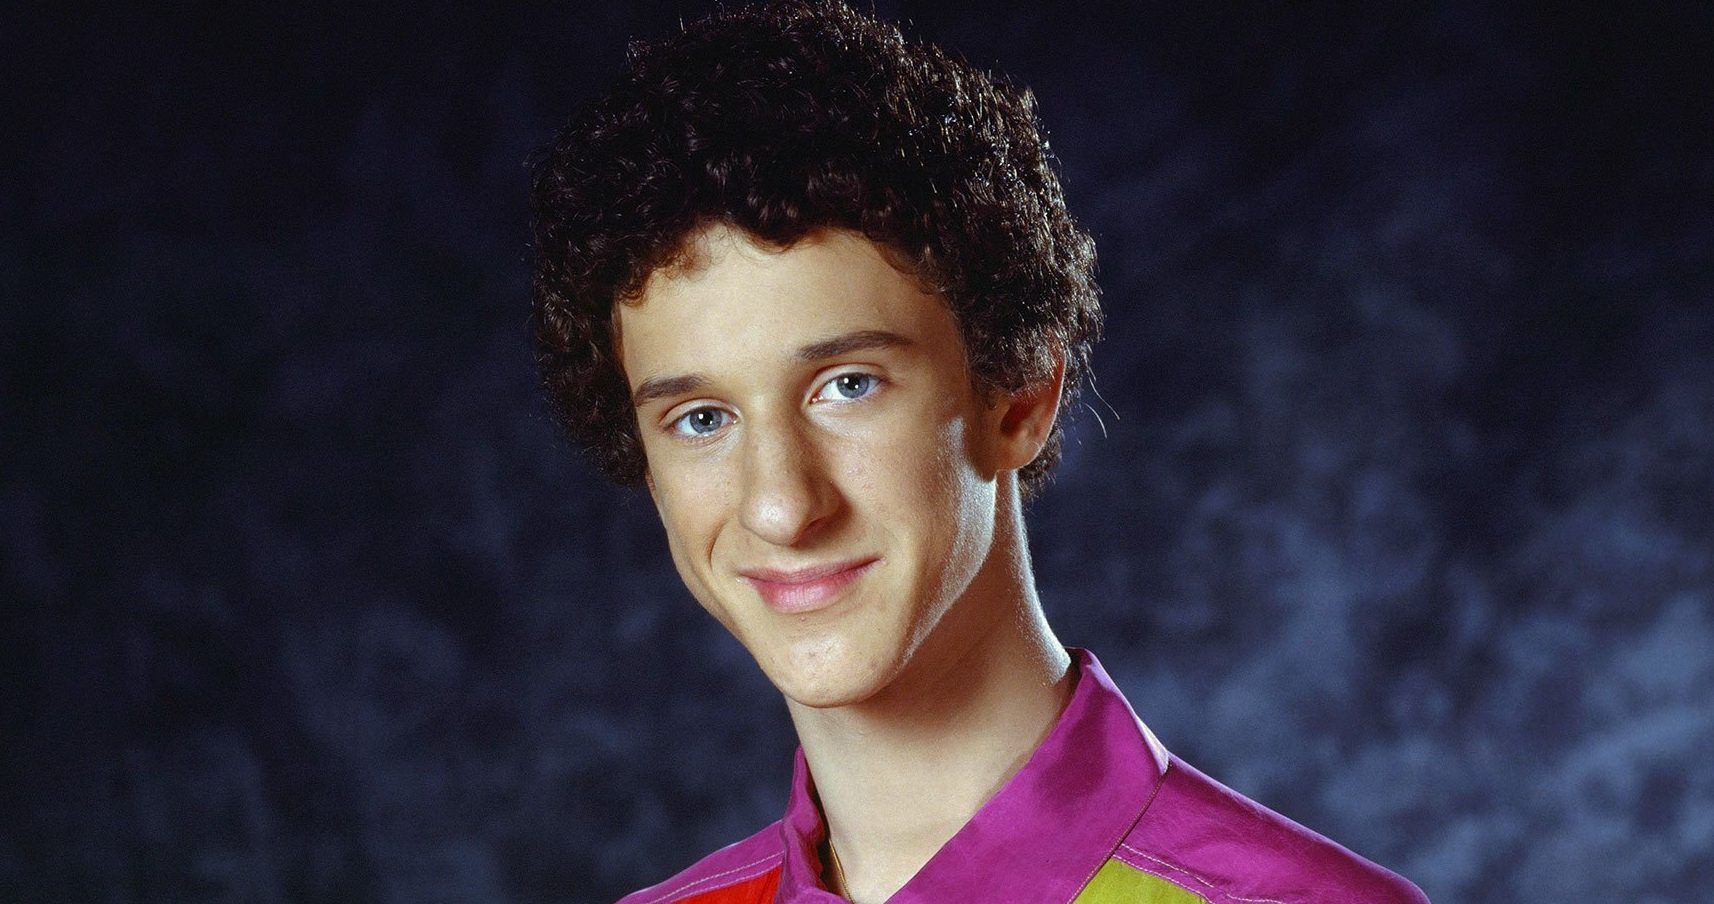 Dustin Diamond from the television sitcom Saved by the Bell